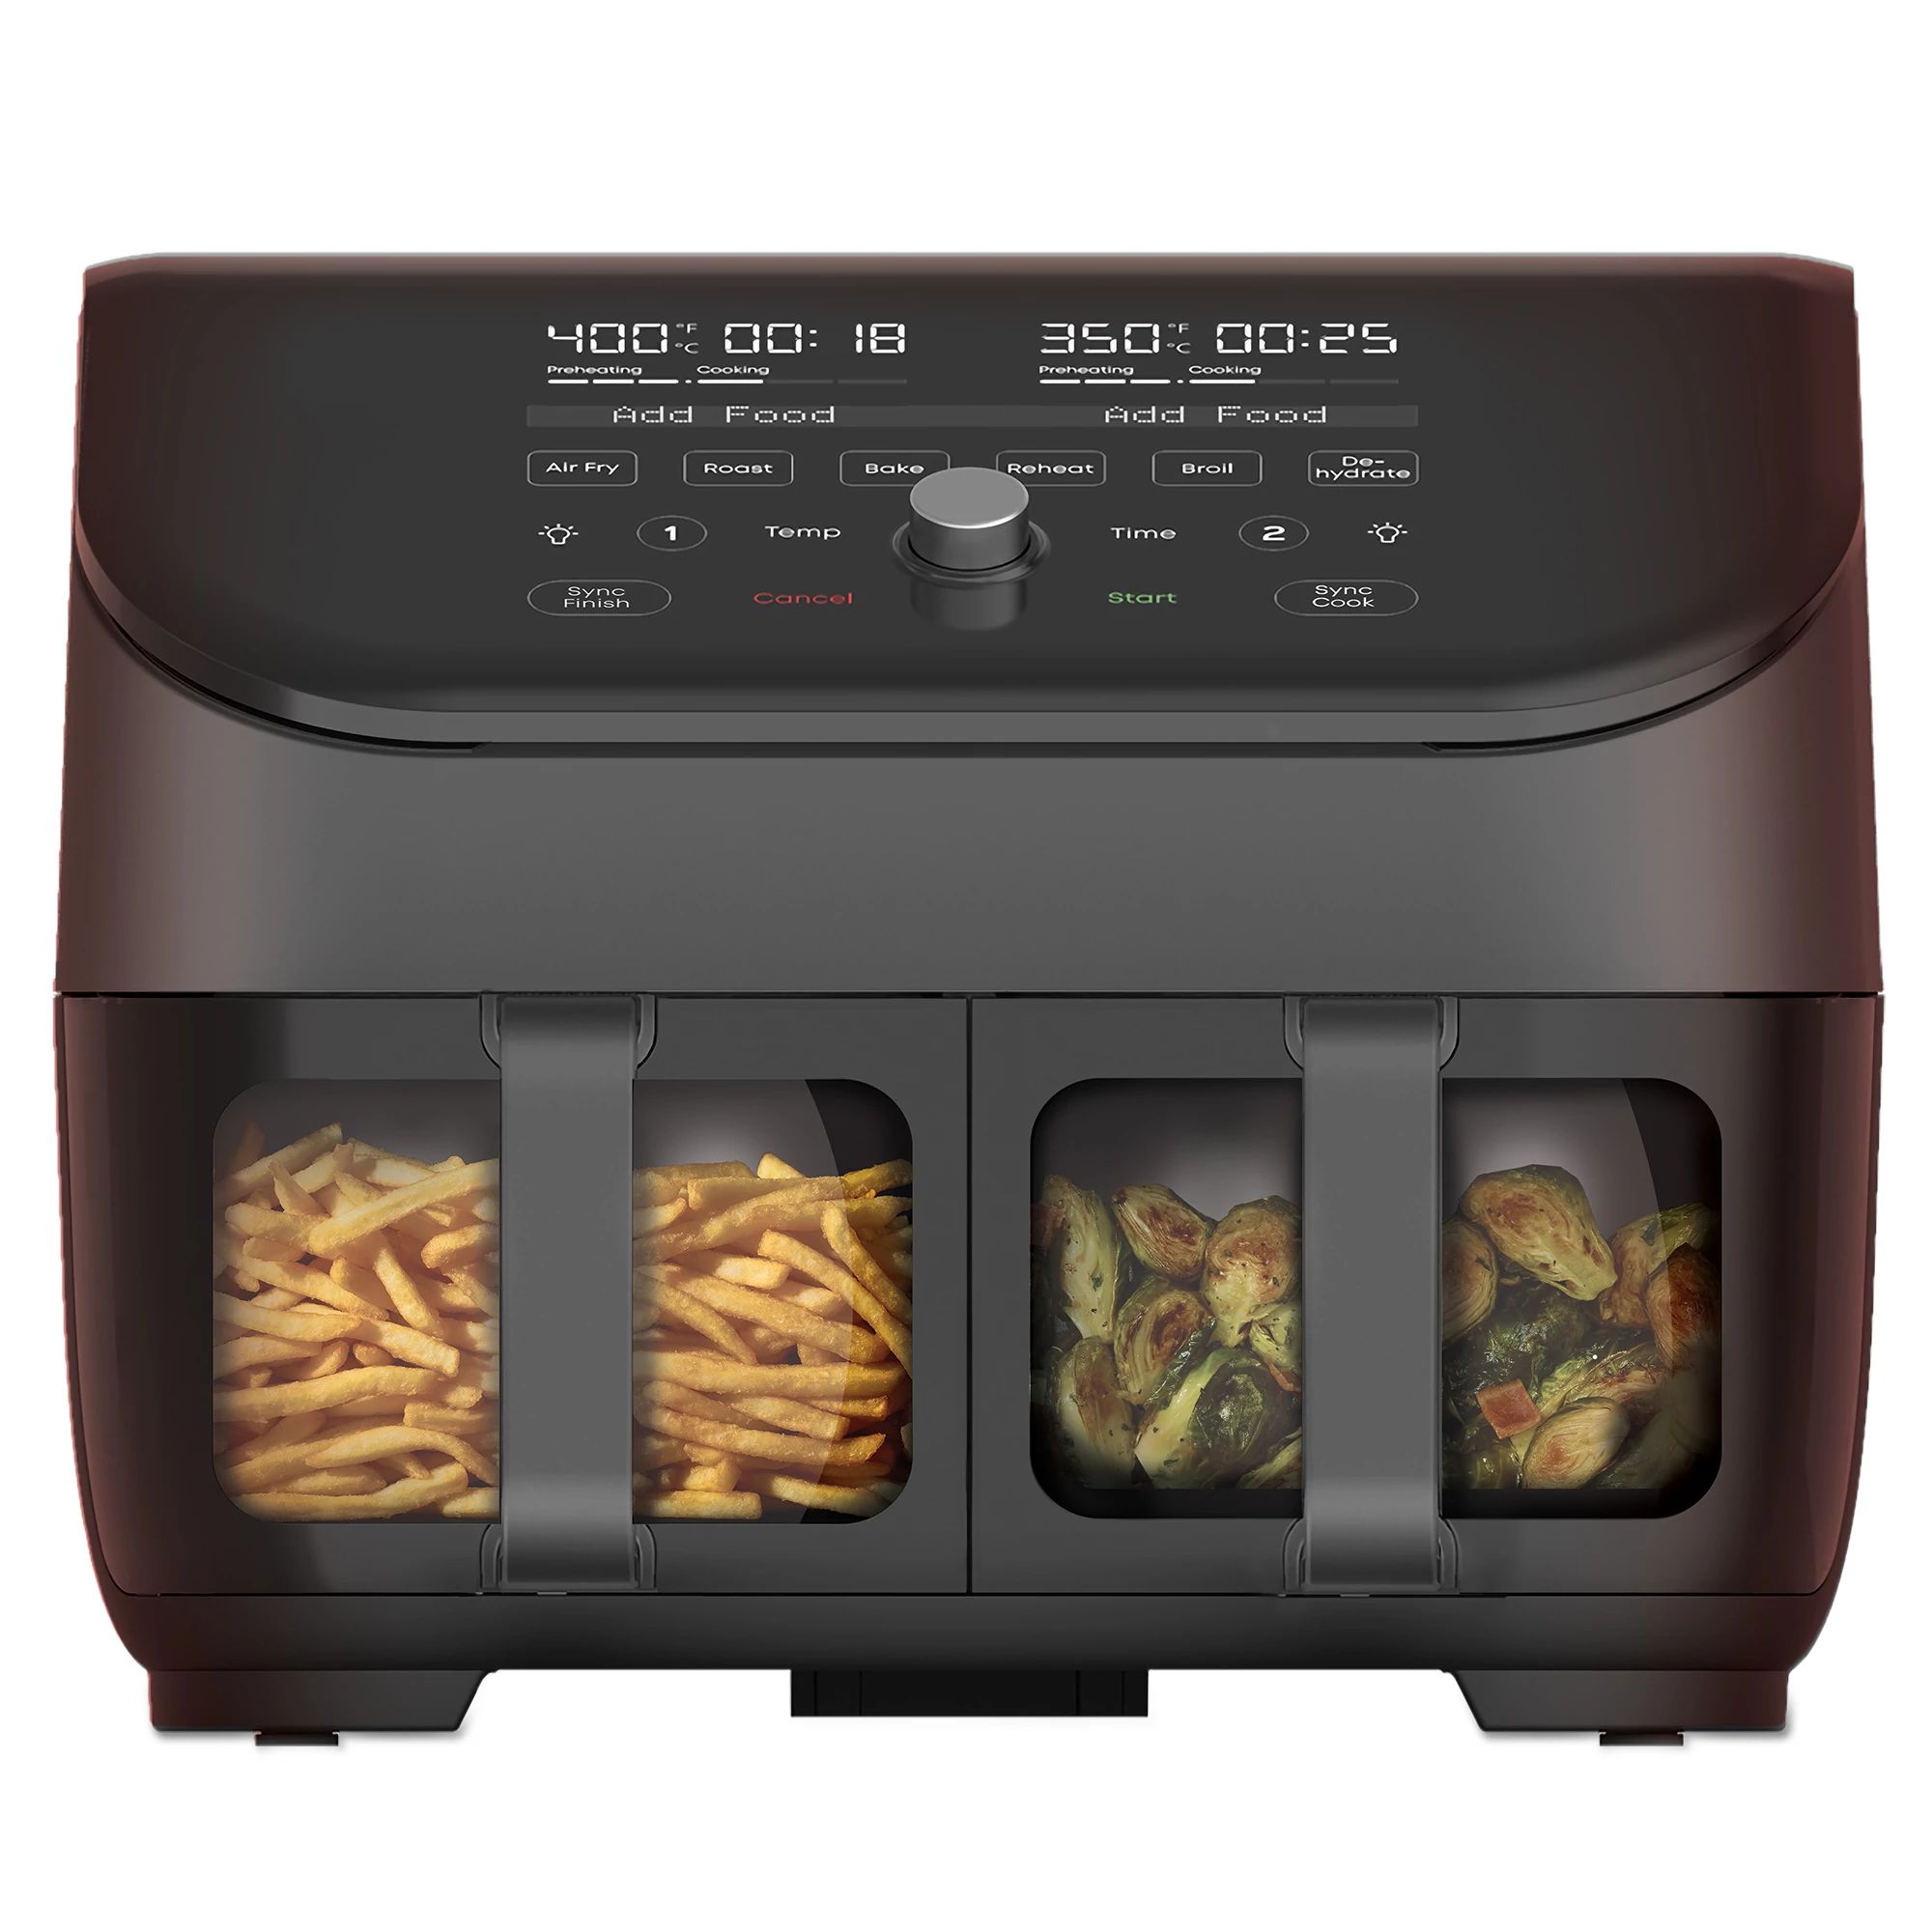 Introducing the Vortex™ Plus Air Fryer with ClearCook, 6-Quart, Black 